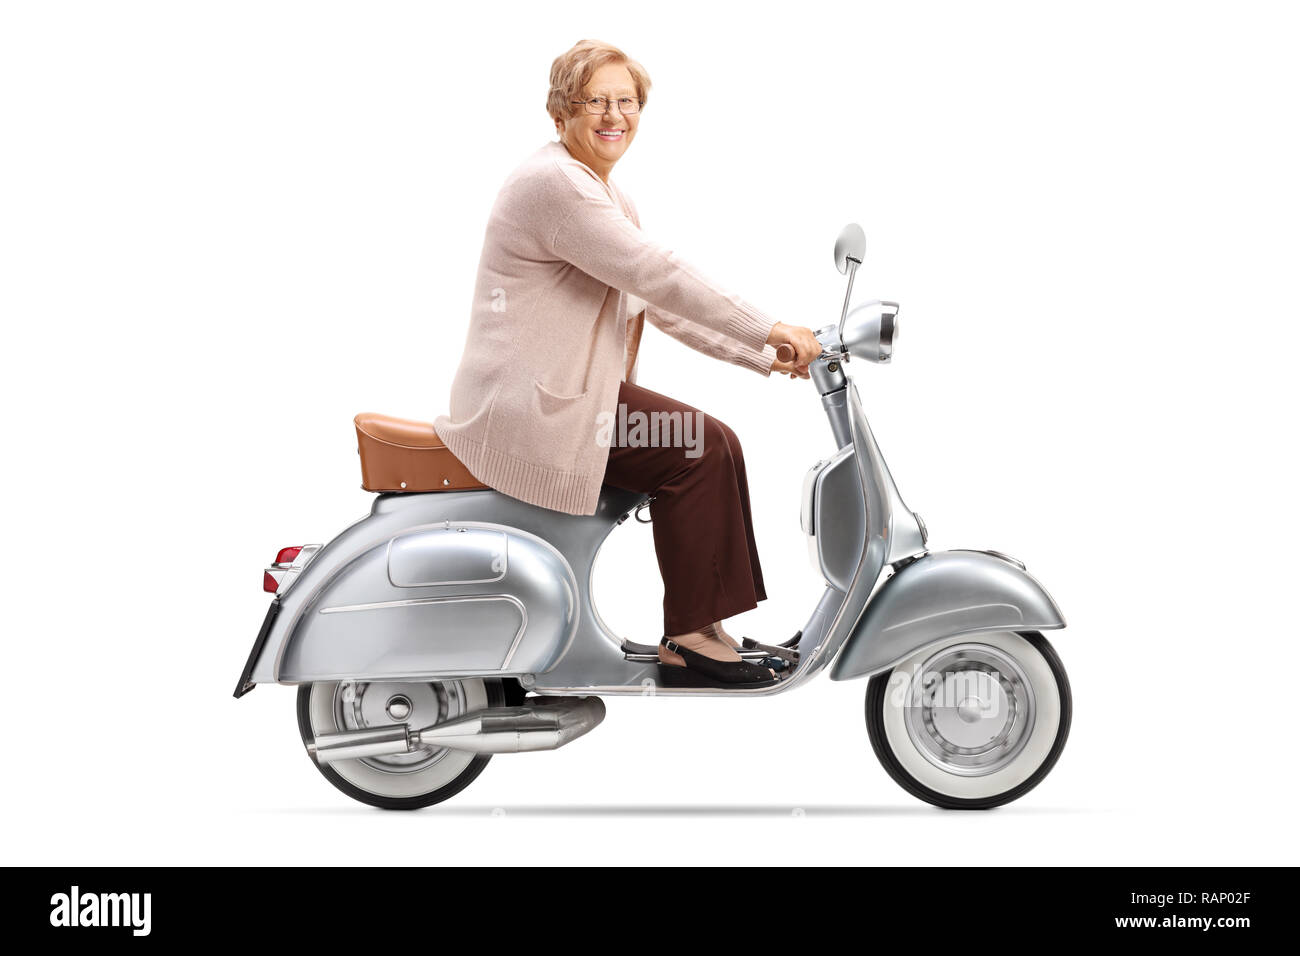 Full length shot of a senior woman riding a vintage scooter and smiling at the camera isolated on white background Stock Photo